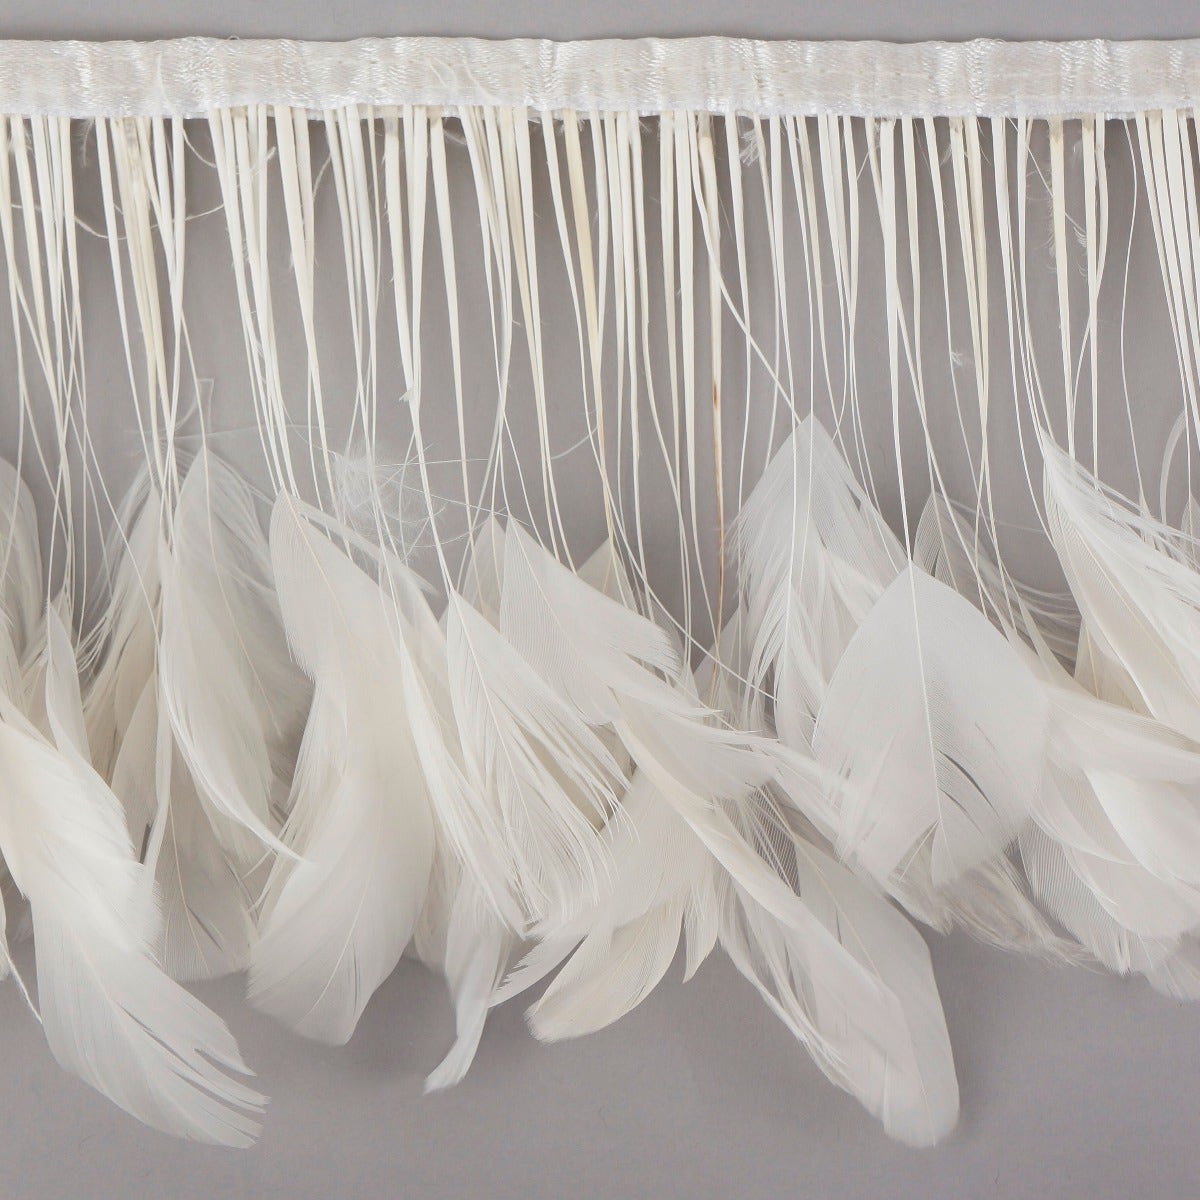 Stripped White-Dyed Coque Fringe - White